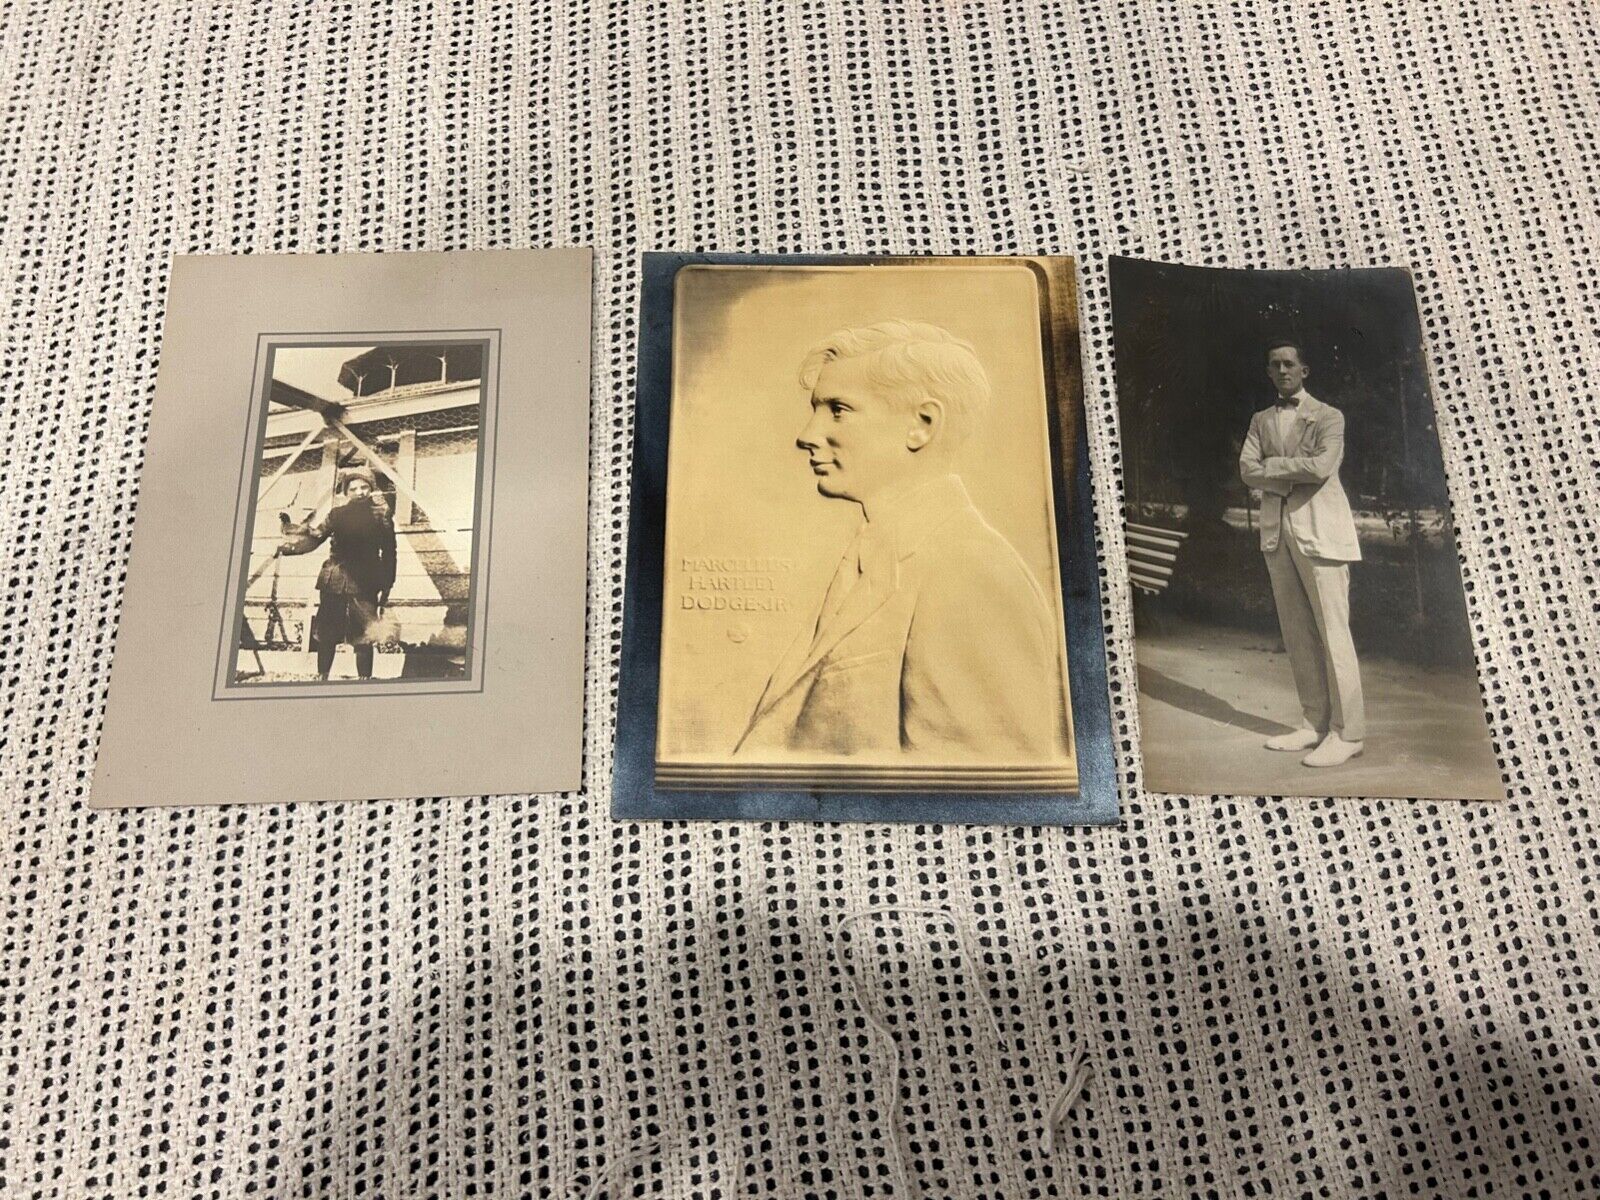 Old photographs lot of 3 - Vintage early 1900's